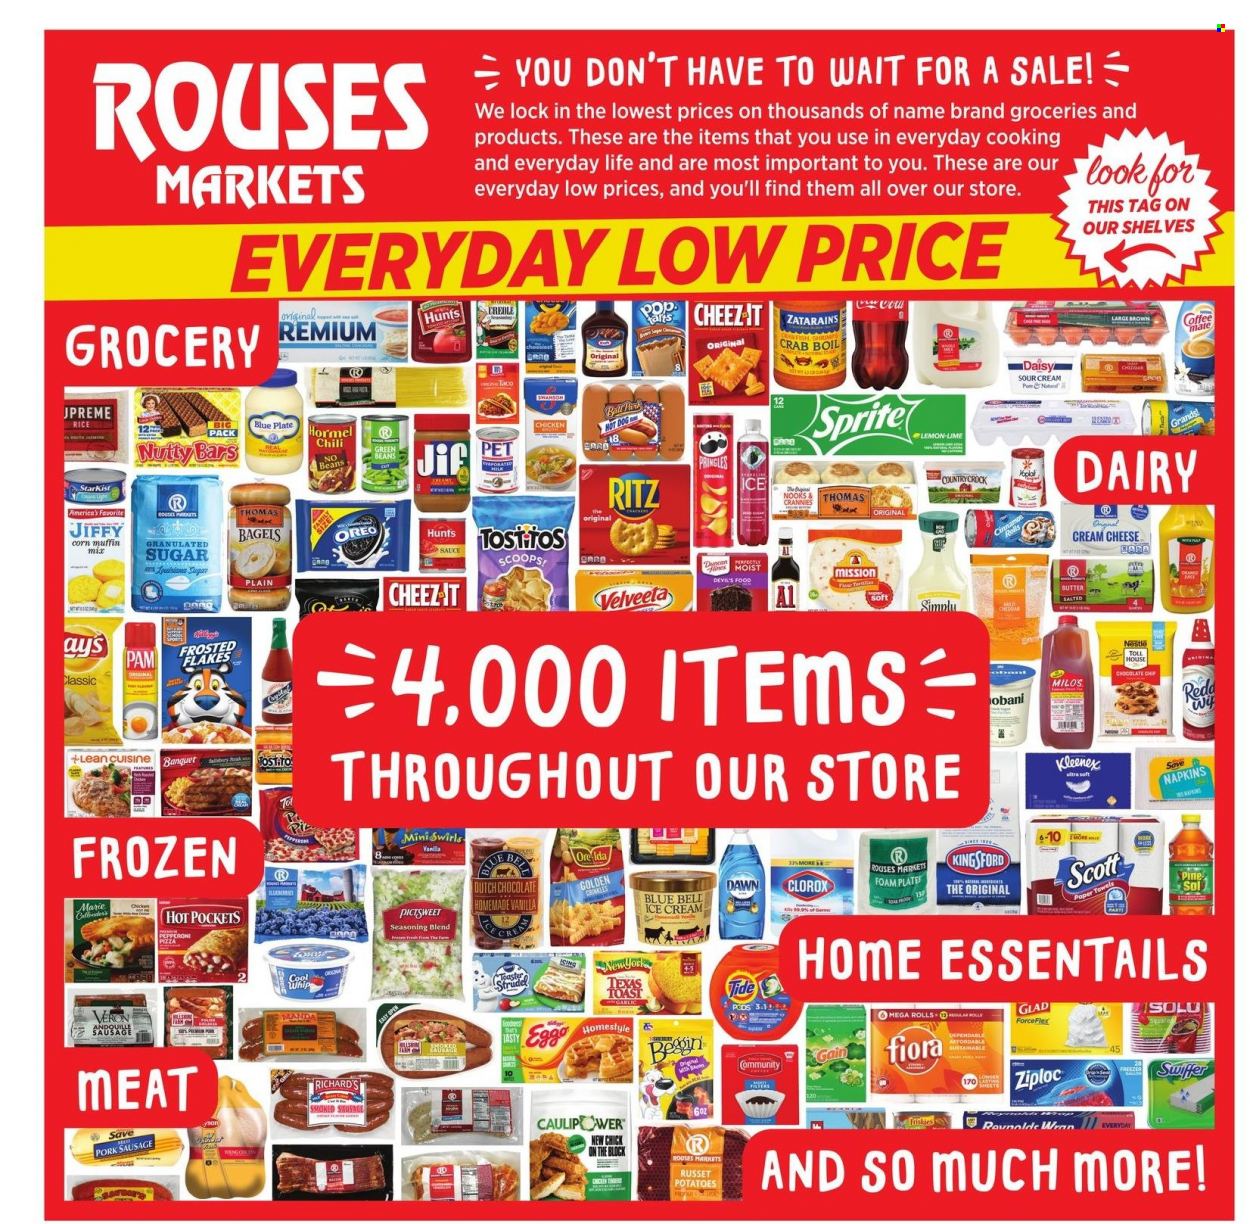 thumbnail - Rouses Markets Flyer - 01/19/2022 - 01/26/2022 - Sales products - bagels, strudel, muffin mix, beans, corn, garlic, green beans, russet potatoes, potatoes, crab, StarKist, sauce, Lean Cuisine, Hormel, sausage, pork sausage, pepperoni, cheese, Oreo, eggs, butter, ice cream, Blue Bell, Ore-Ida, Nestlé, chocolate chips, RITZ, Pringles, Tostitos, granulated sugar, sugar, corn muffin, Frosted Flakes, rice, spice, Jif, Sprite, L'Or, napkins, Kleenex, Scott, Gain, Clorox, Tide, Ziploc, foam plates, Friskies, Jiffy. Page 2.